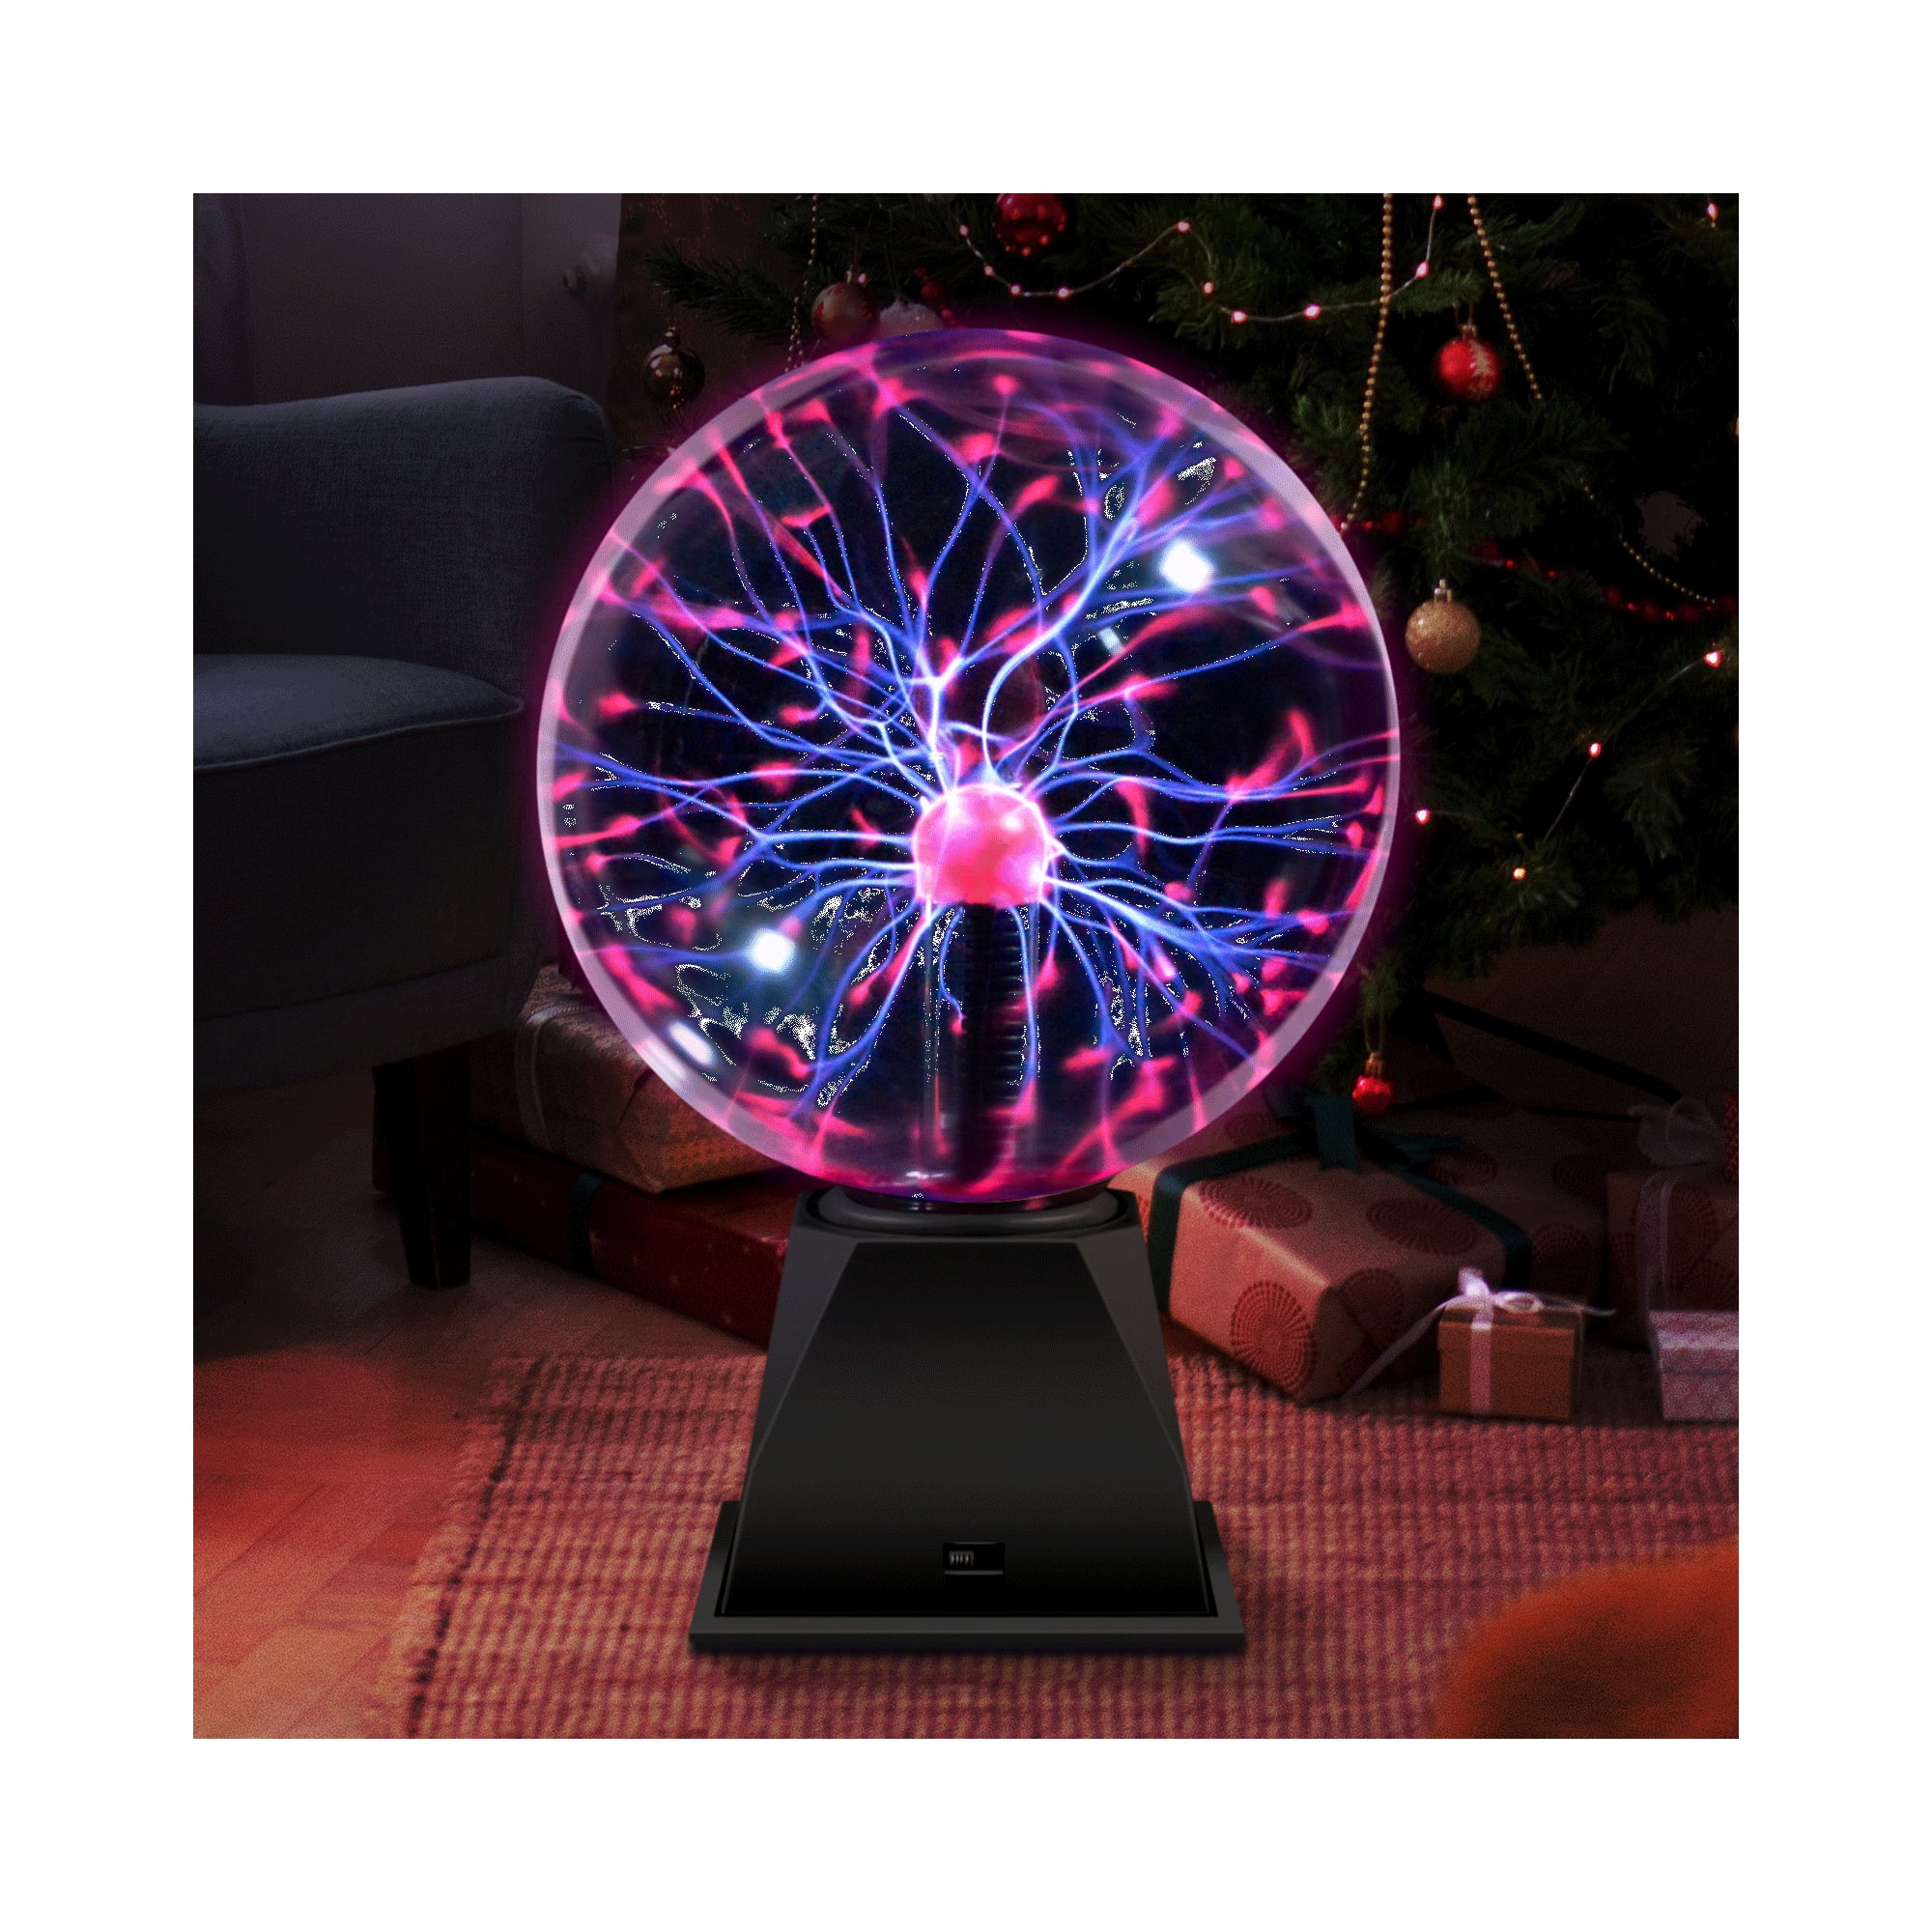 Plasma Ball - 3/4/5/6 Inch - Nebula Sphere Plasma Lamp Novelty Toy for  Kids/Decorations/Bedroom, Best Gift for Birthday or Holiday